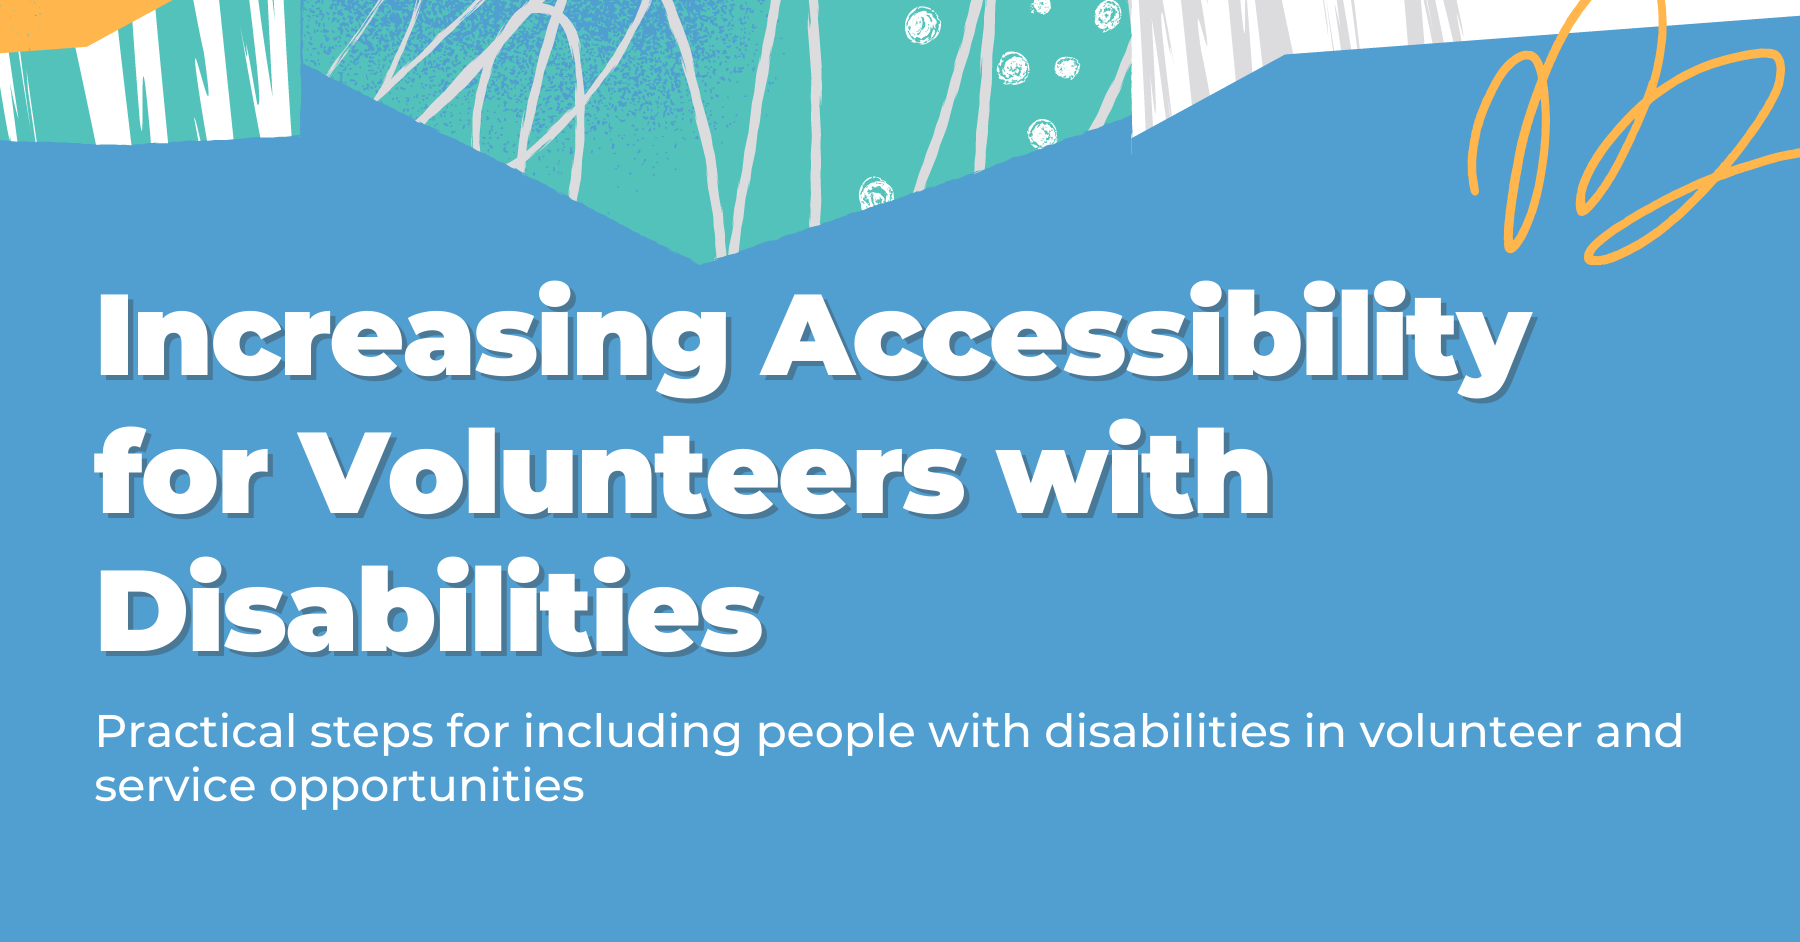 Widening the Circle: Accessibility Resources to Increase Inclusion of Volunteers with Disabilities - GivePulse Blog